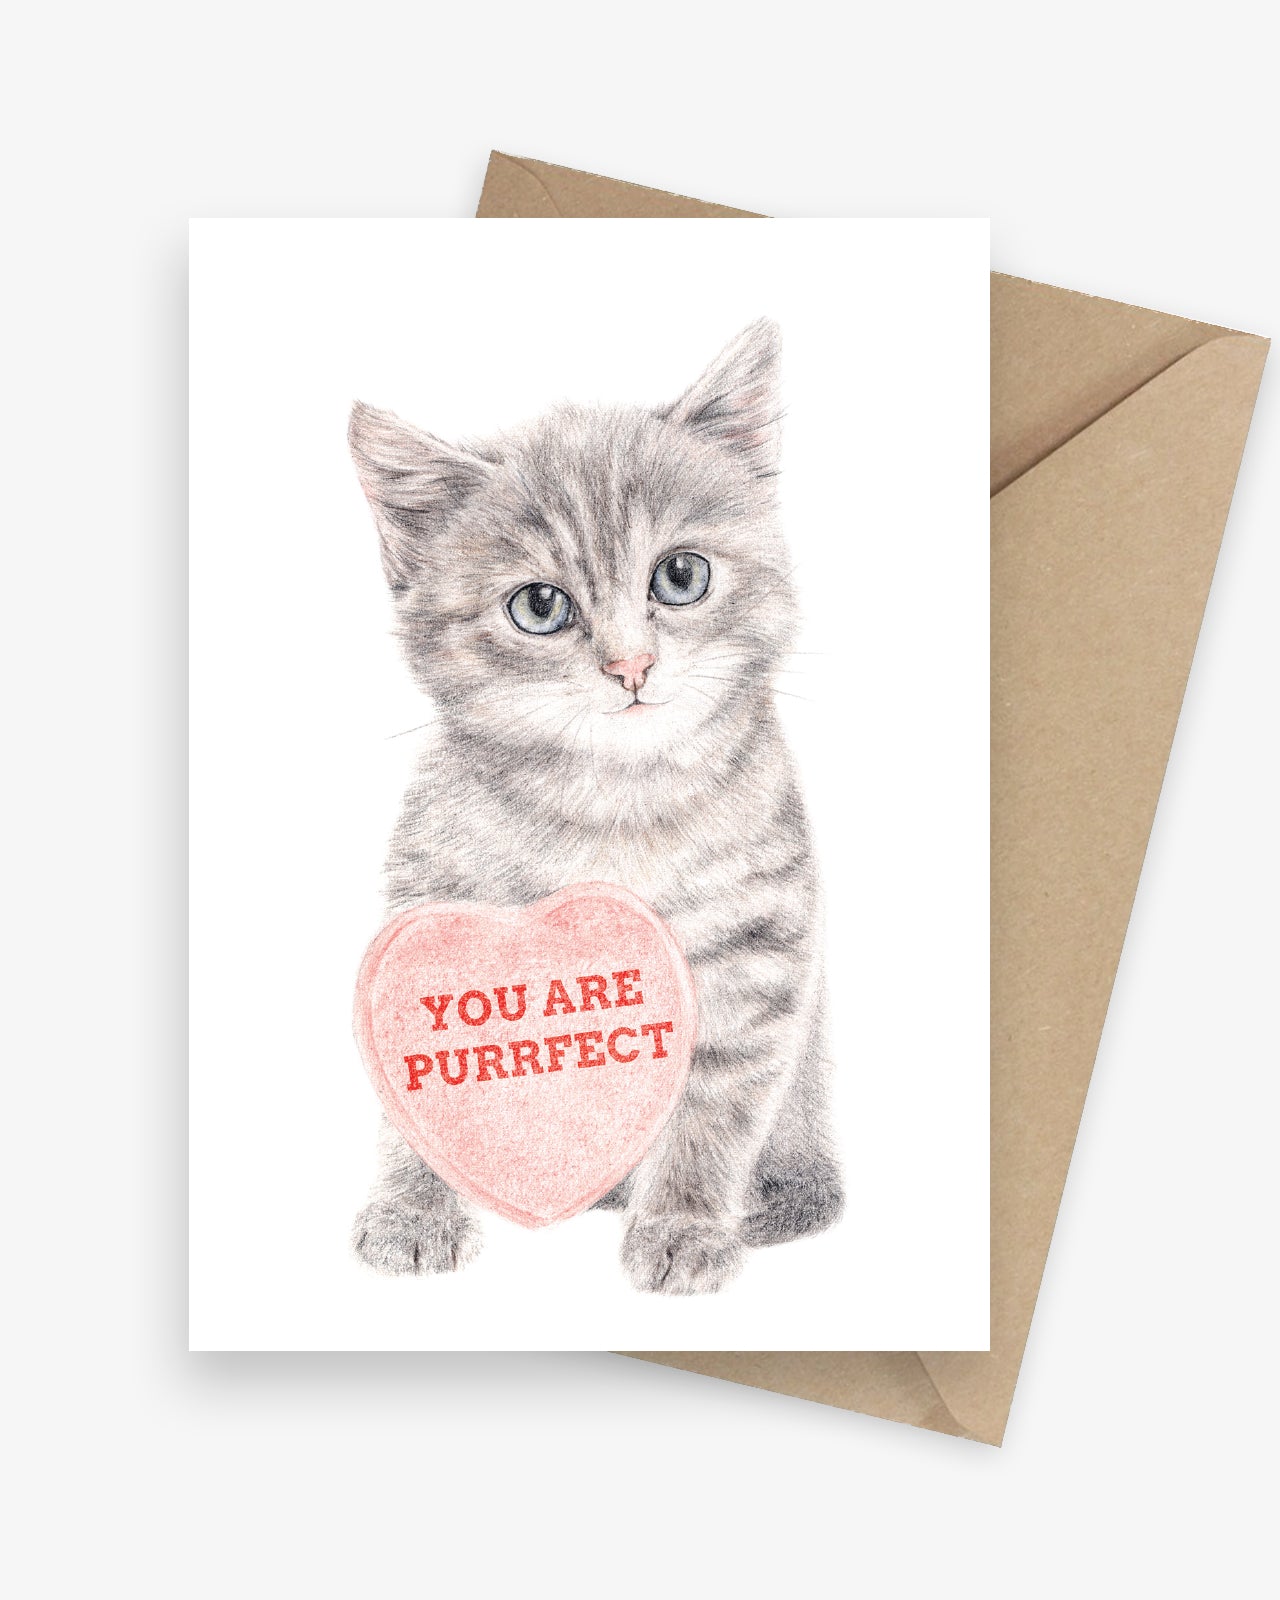 Greeting card featuring a kitten holding a big love heart.